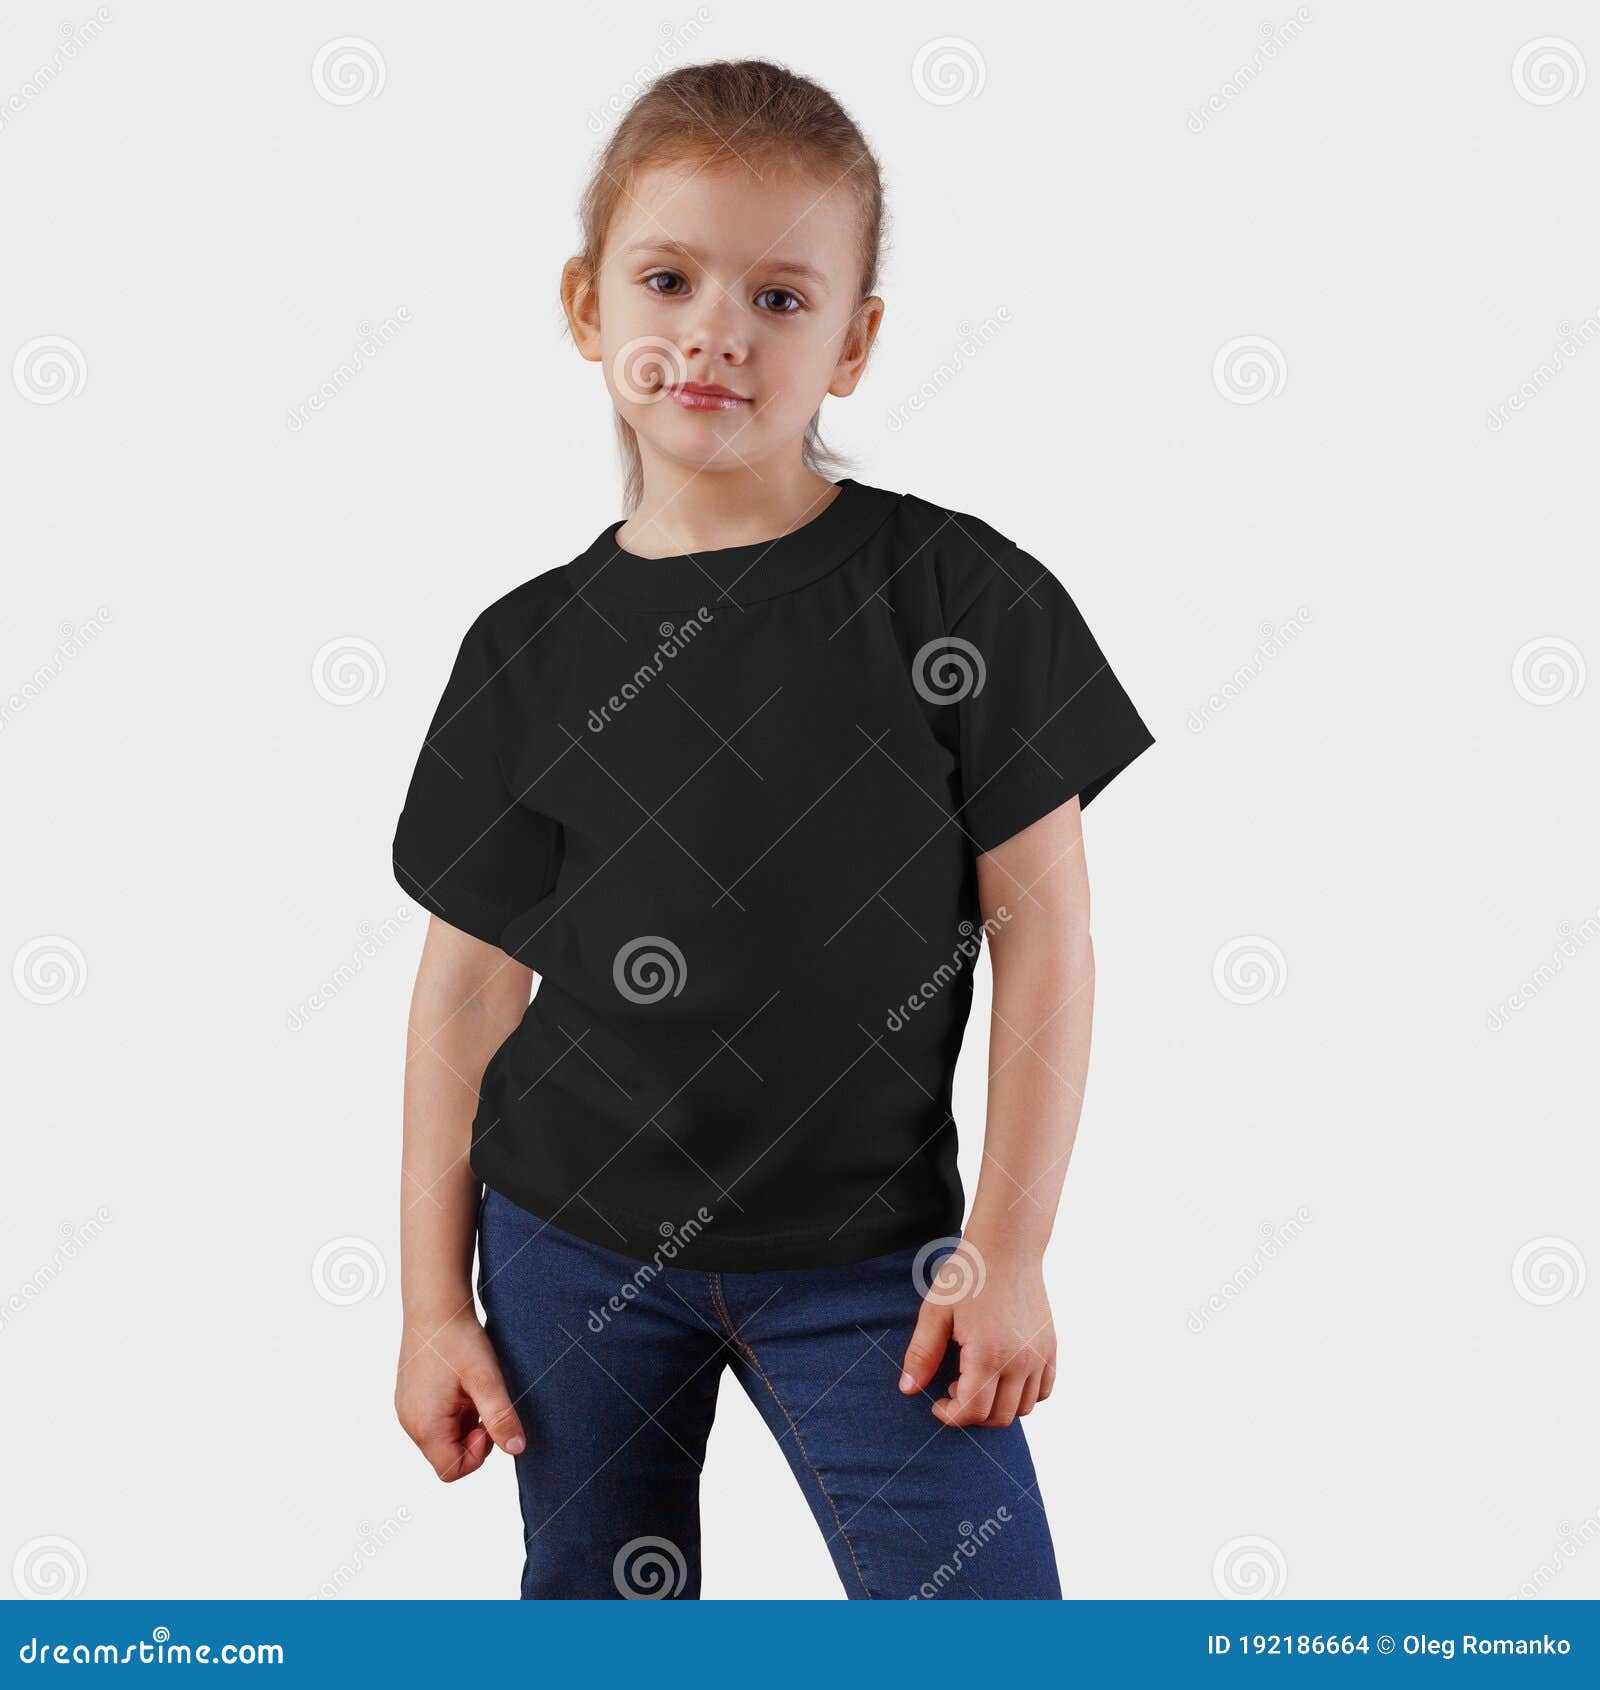 Download Mockup Blank T Shirts On A Beautiful Girl Posing Face Black Clothing For Children For Presentation Of Design And Print Stock Photo Image Of Black Cute 192186664